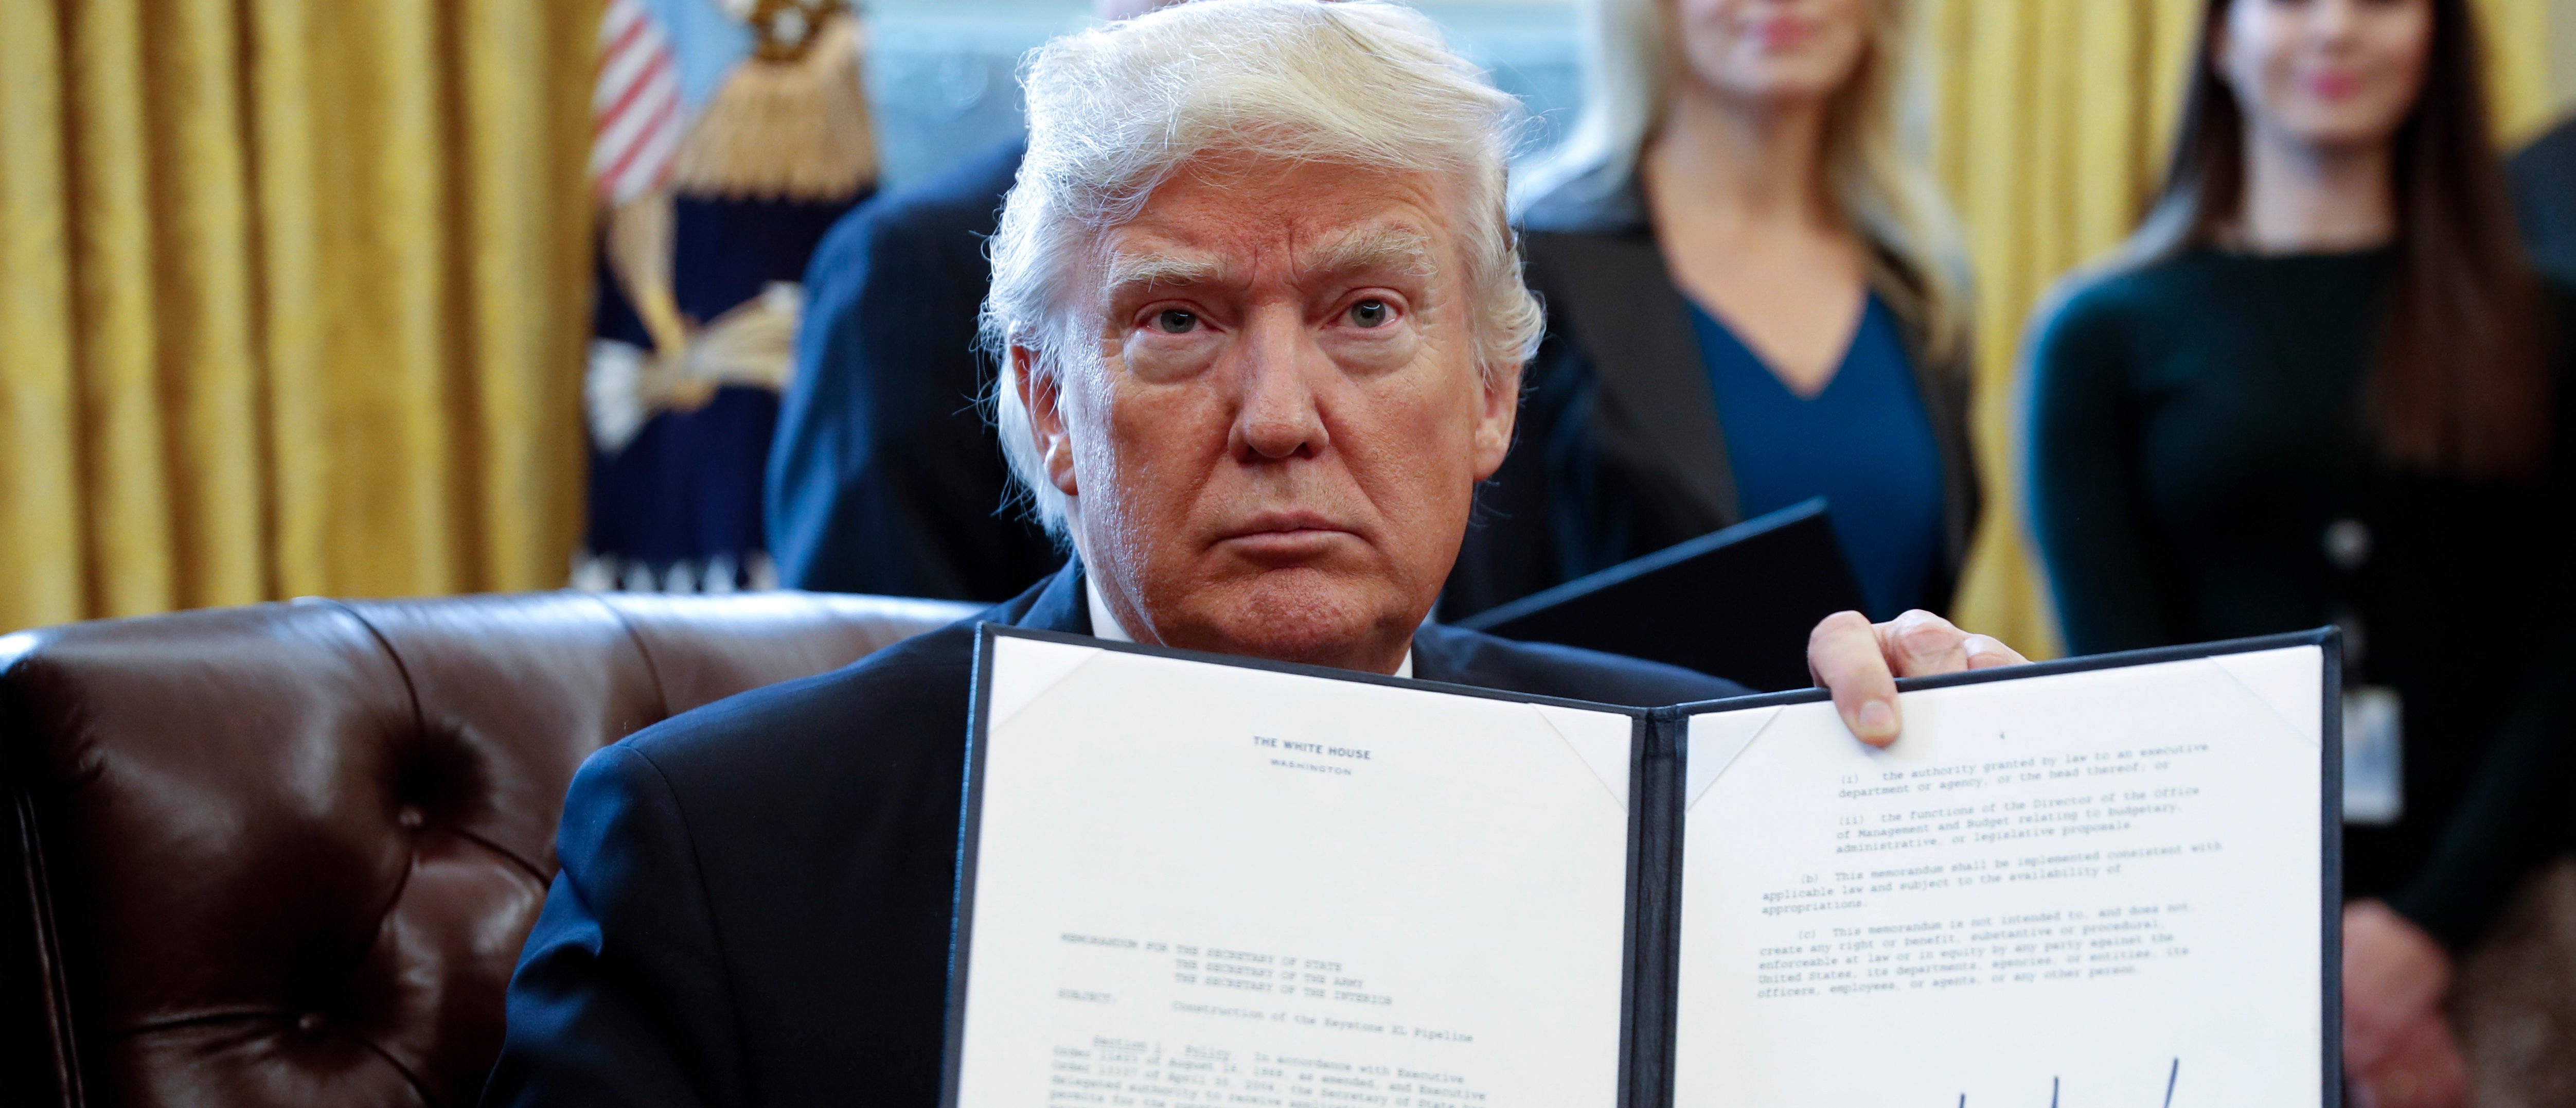 WASHINGTON, DC - JANUARY 24: US President Donald Trump displays one of five executive orders he signed related to the oil pipeline industry in the oval office of the White House January 24, 2017 in Washington, DC. President Trump has a full day of meetings including one with Senate Majority Leader Mitch McConnell and another with the full Senate leadership. (Photo by Shawn Thew-Pool/Getty Images)